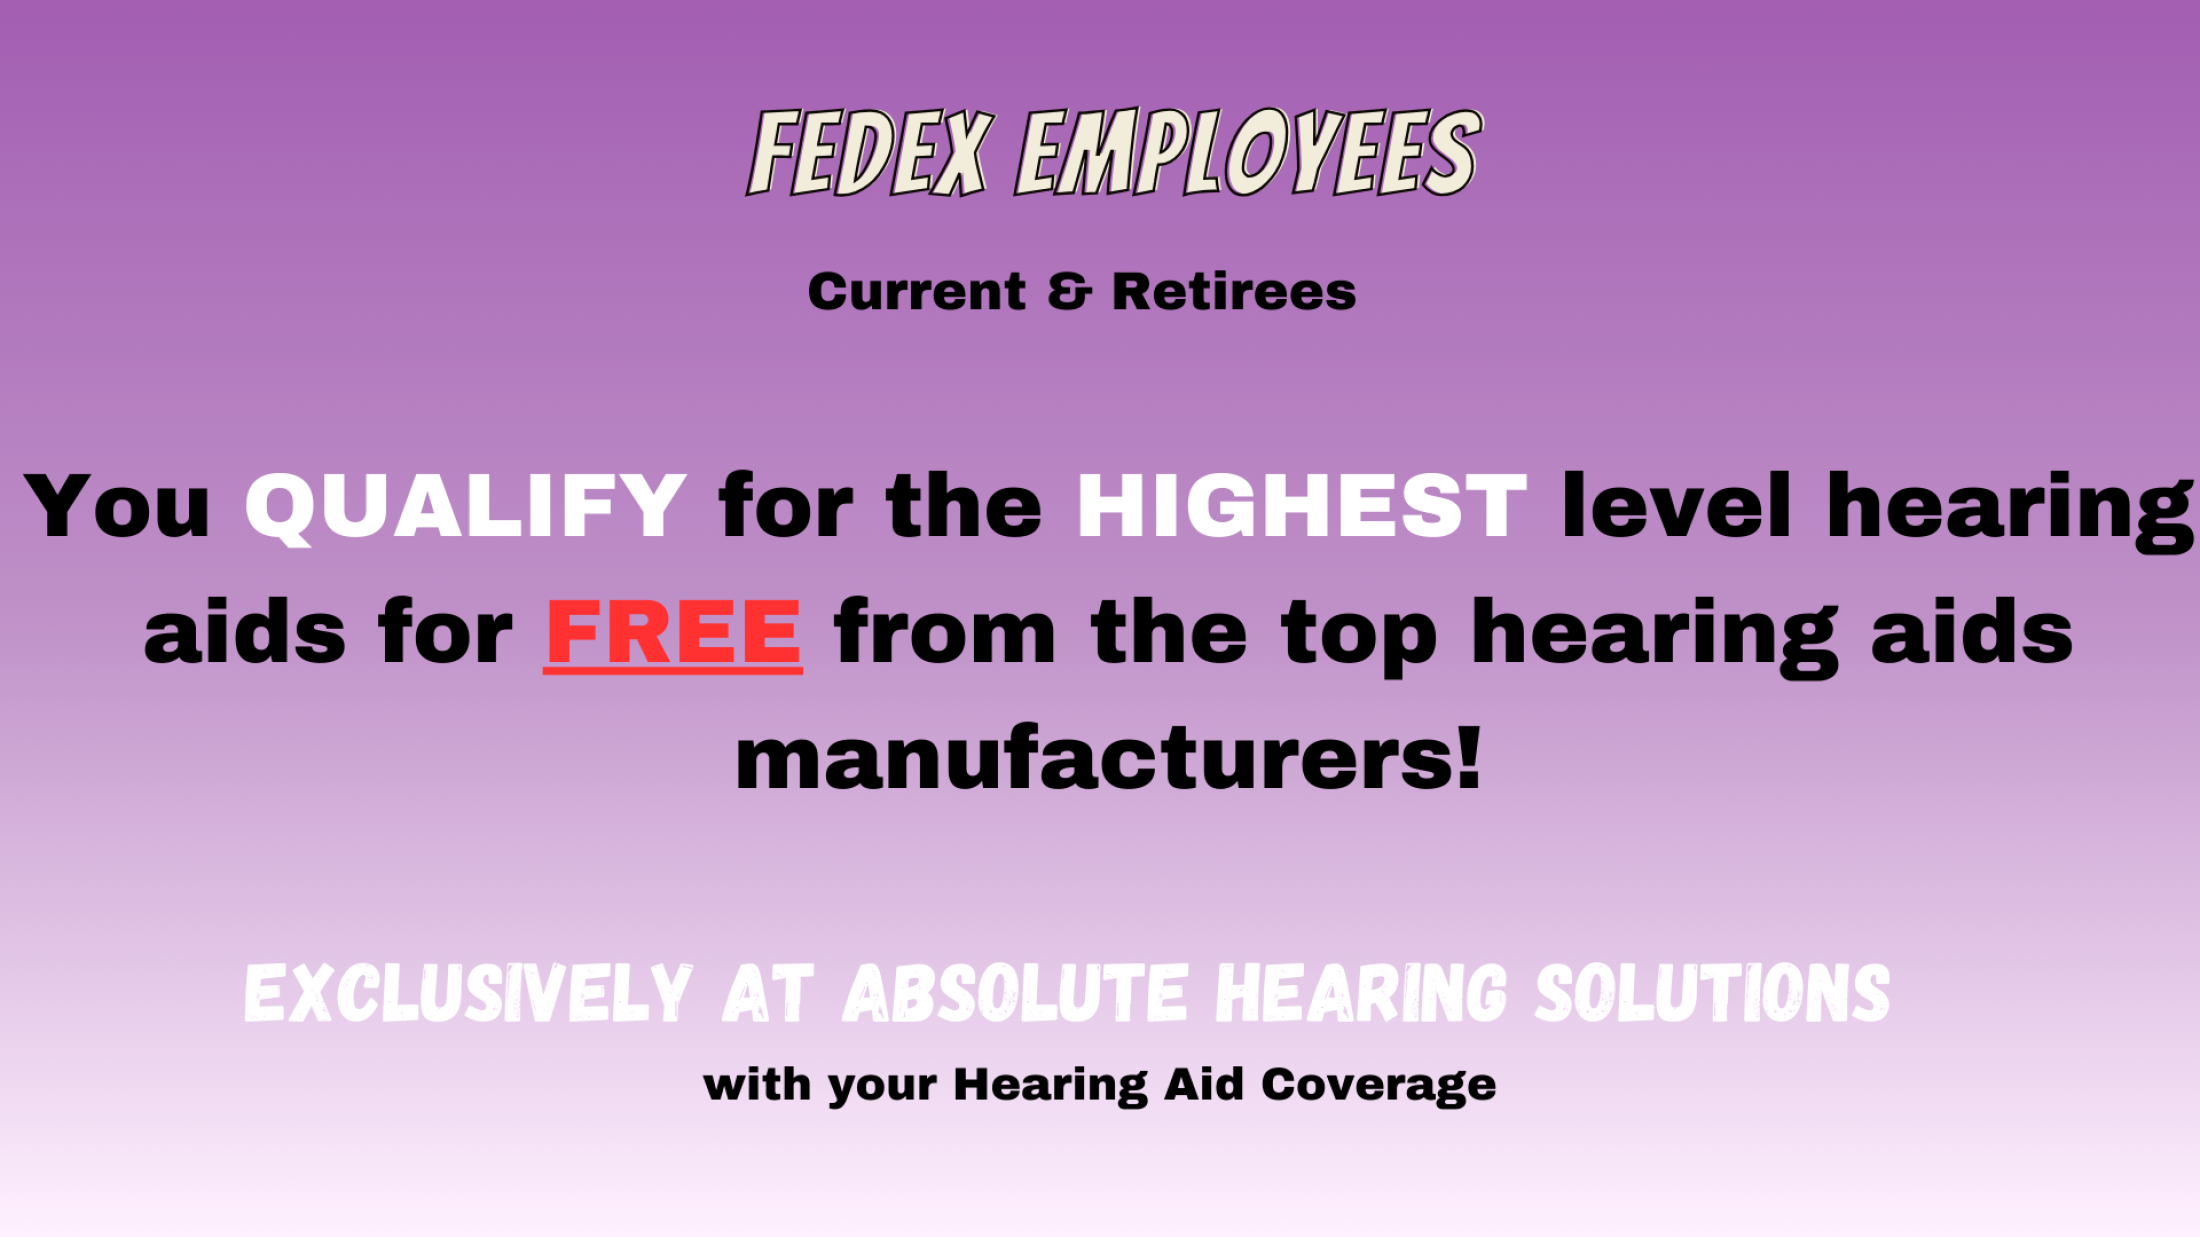 FedEx Employees Qualify For Free Higher Level Hearing Aids with Absolute Hearing Solutions